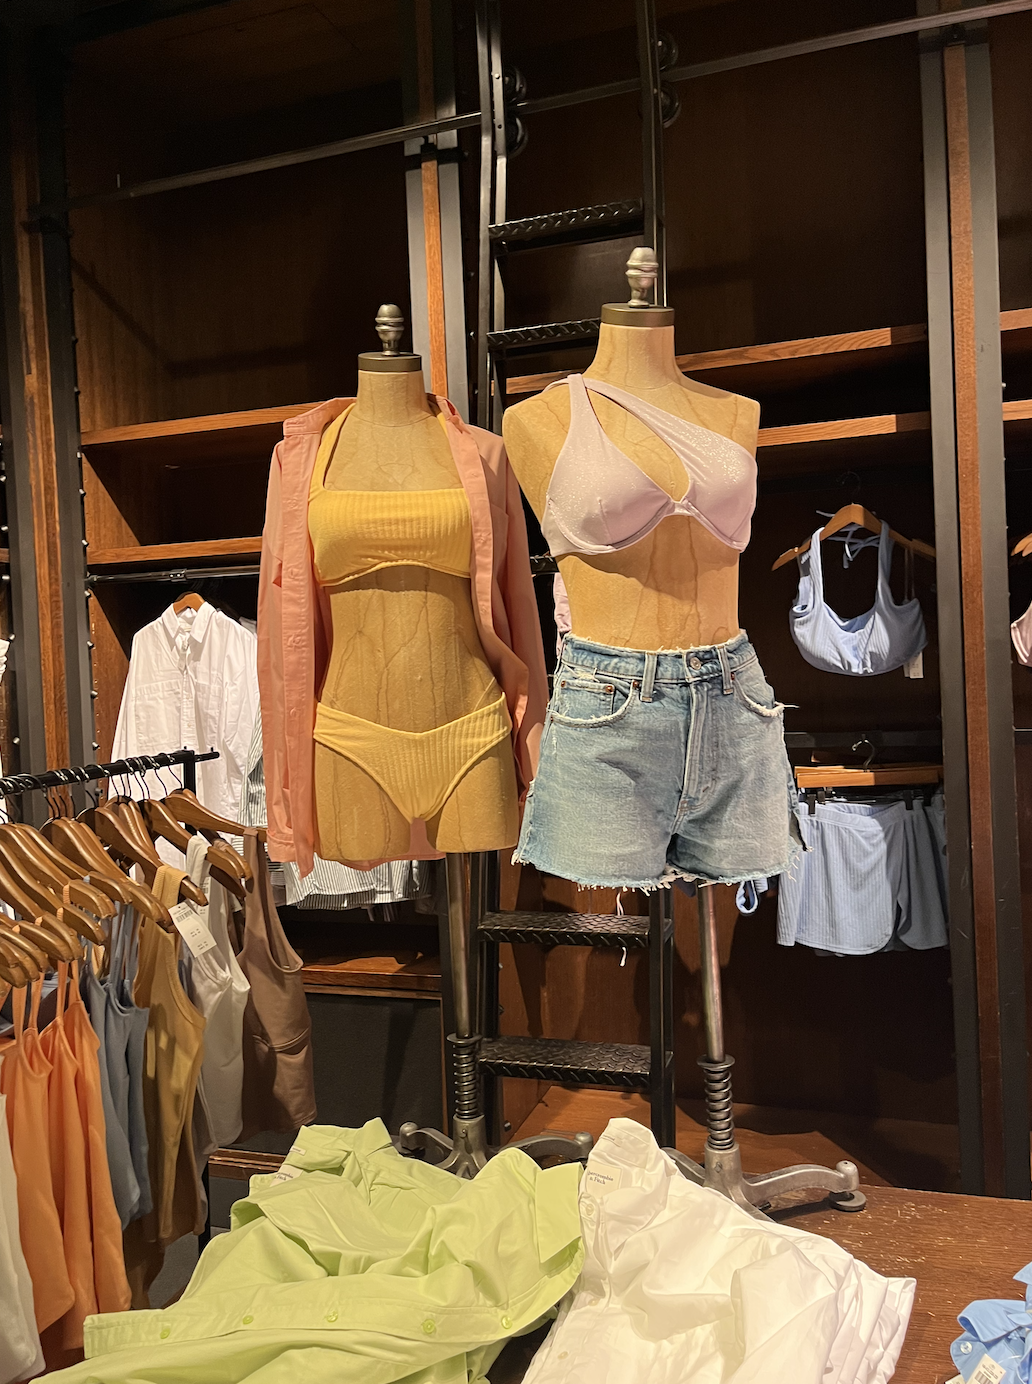 Bathing suits and shorts on display on headless mannequins